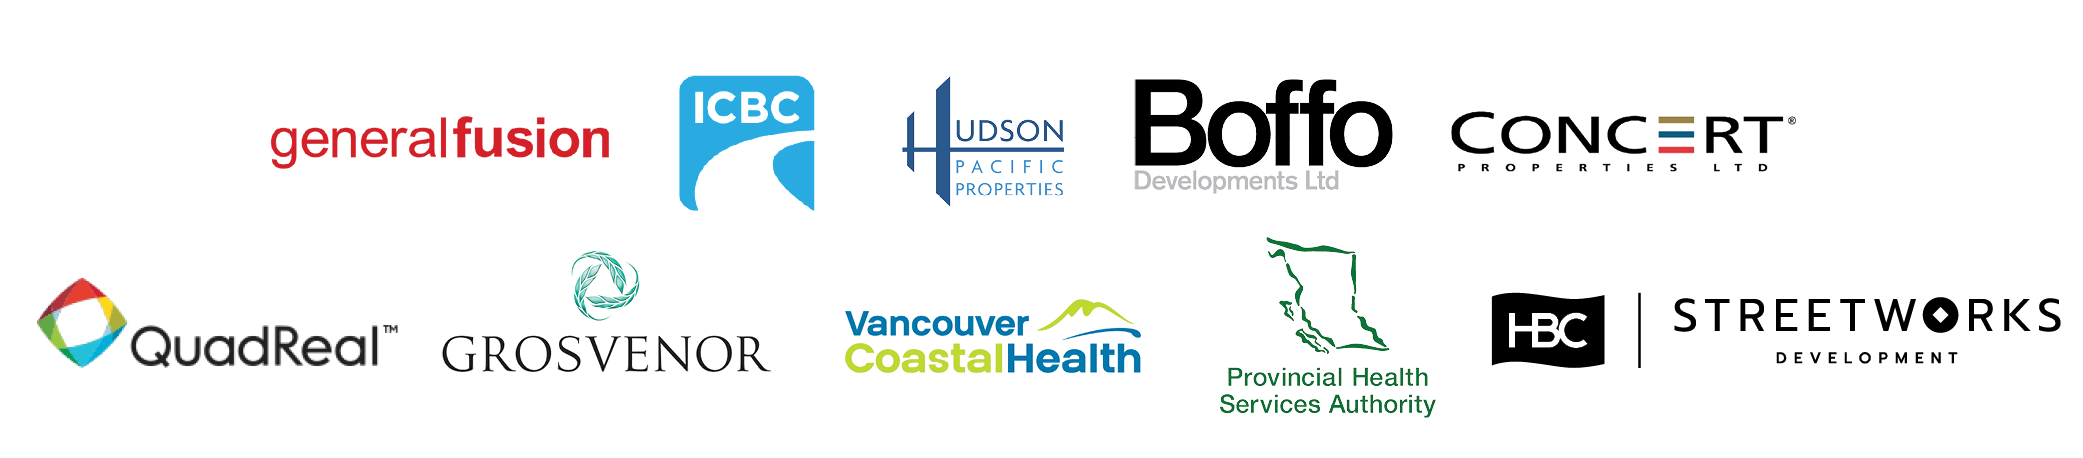 A logo slurry of the Bike-Friendly Building Consulting team's clients. Past clients include general fusion, ICBC, Hudson Pacific Properties Boffo Developments, Concert Properties, QuadReal, Grosvenor, Vancouver Coastal Health, Provincial Health Services Authority, and HBC Streetworks.